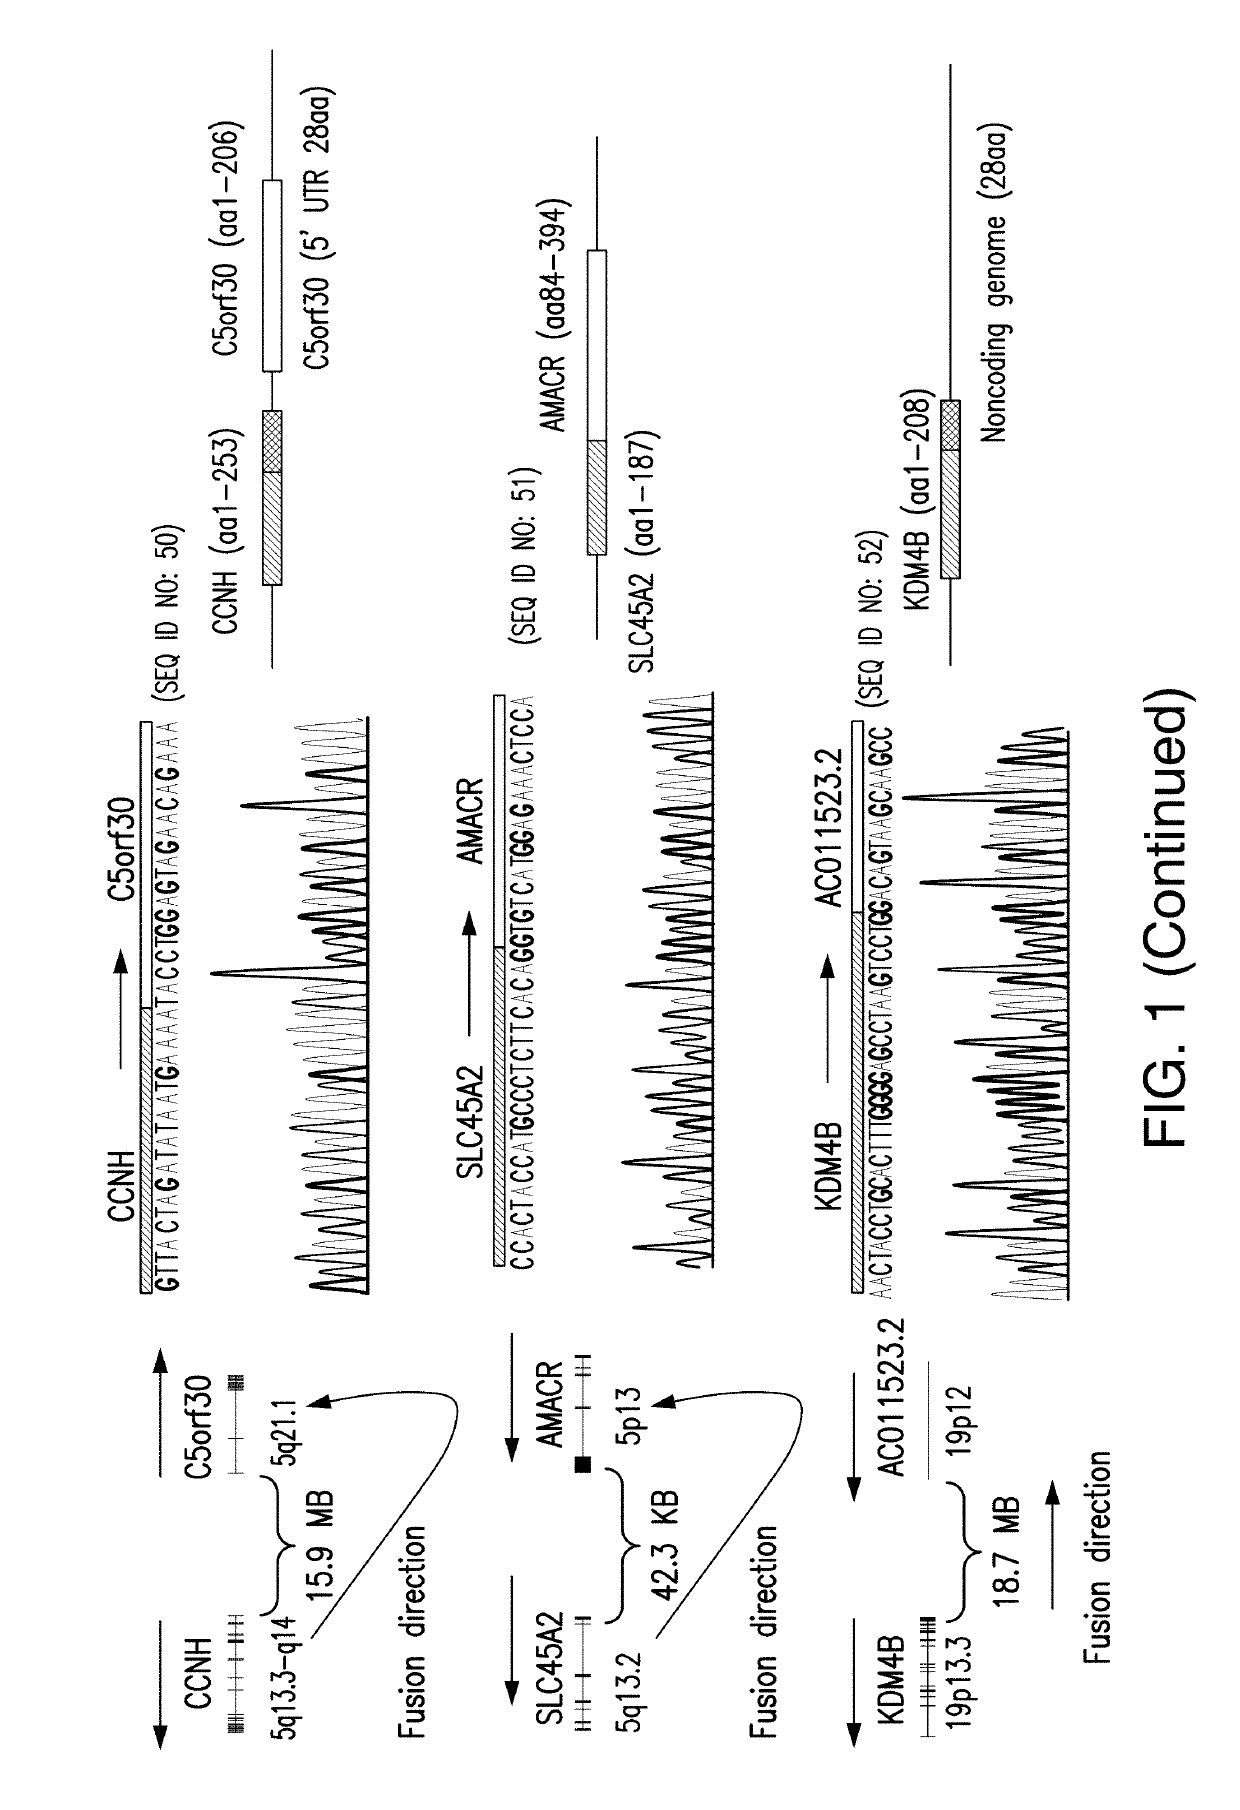 Methods for treating cells containing fusion genes